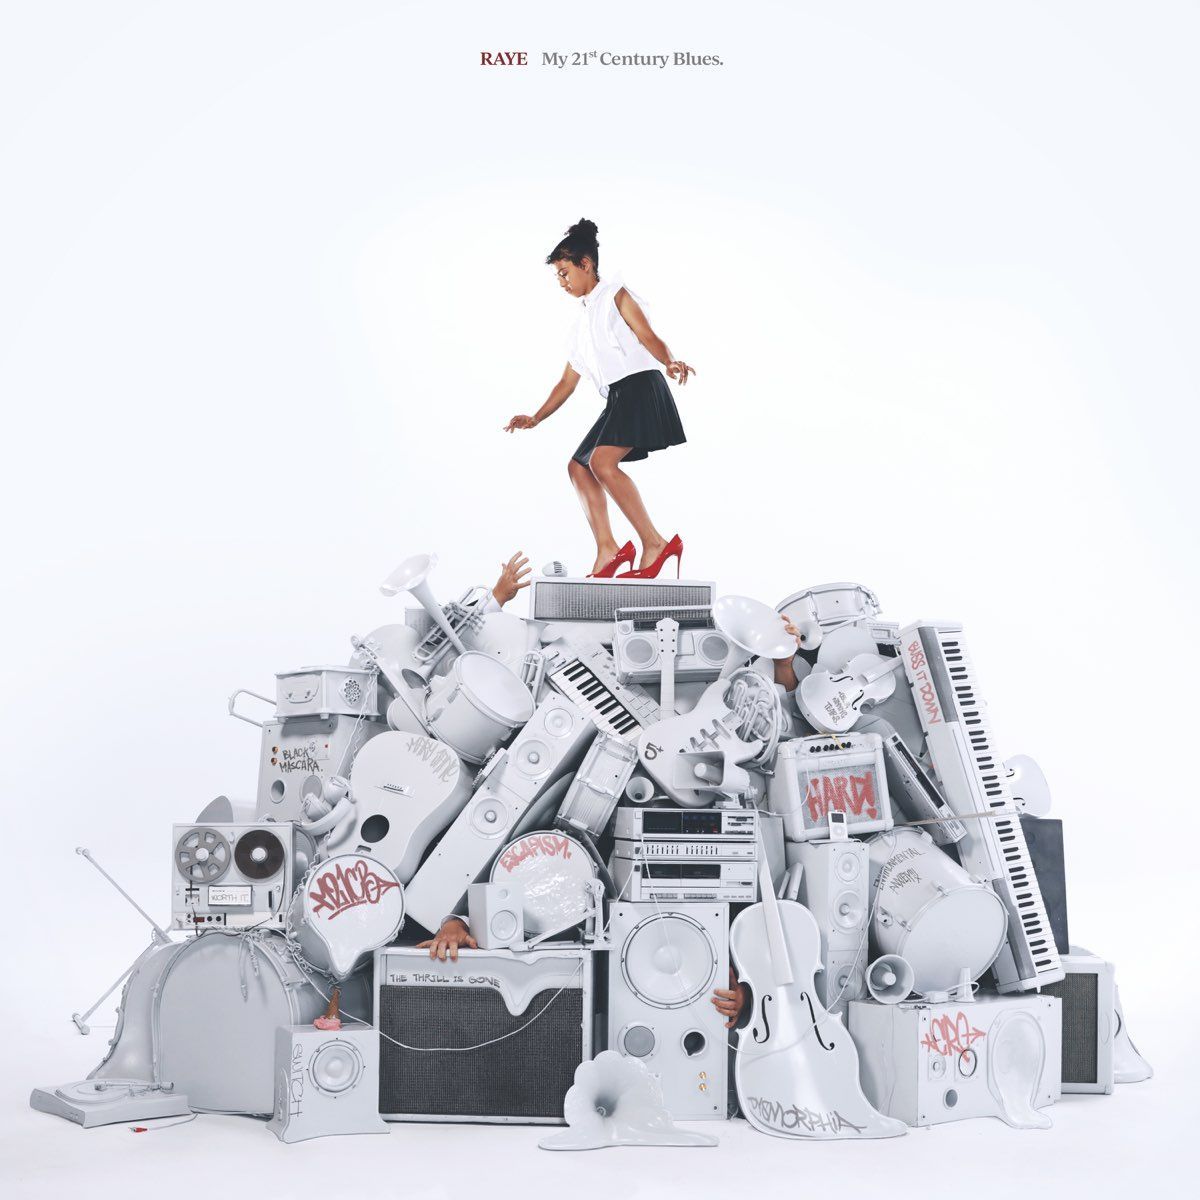 Albumism’s @marramark has selected #Raye’s ‘My 21st Century Blues’ as one of his 10 FAVORITE ALBUMS OF 2023 | Explore the other albums featured in his Top 10 + all of our writers’ picks here: album.ink/WritersFaves23 @raye